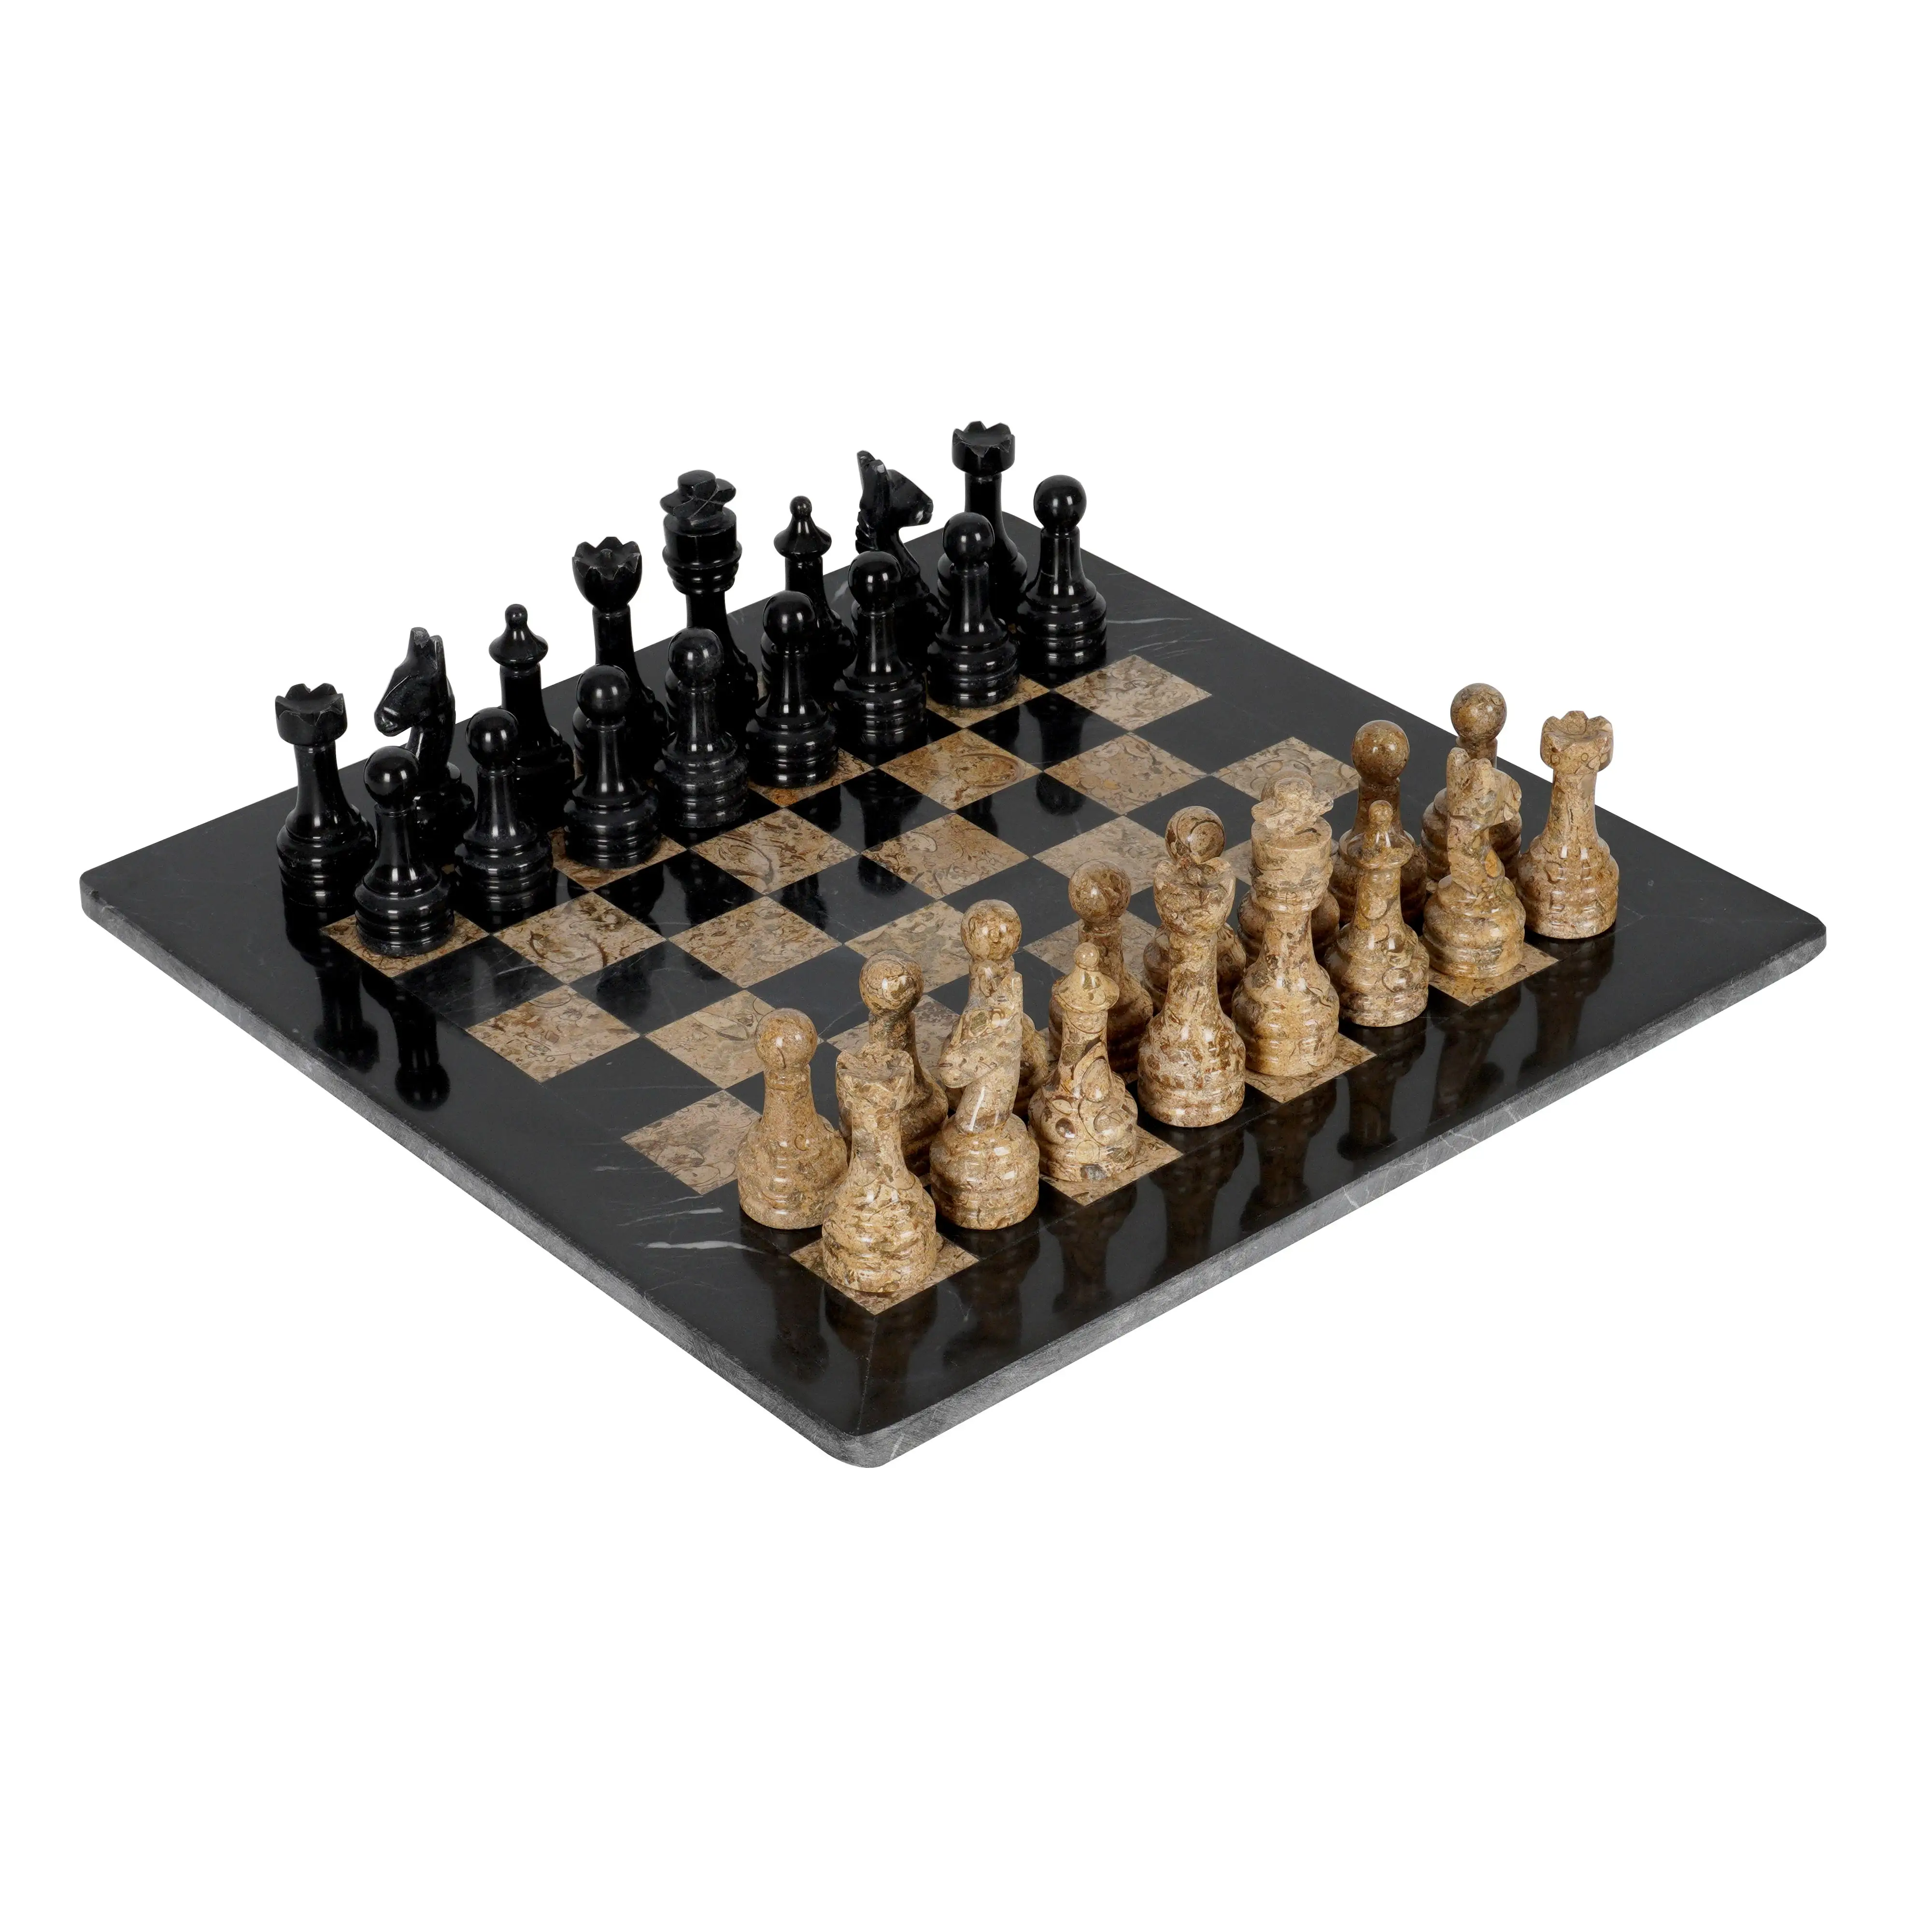 15 Inches Large Handmade Weighted Full Chess Game Set Tournament Chess Sets Gift Style Marble for Adults High Quality Horizontal